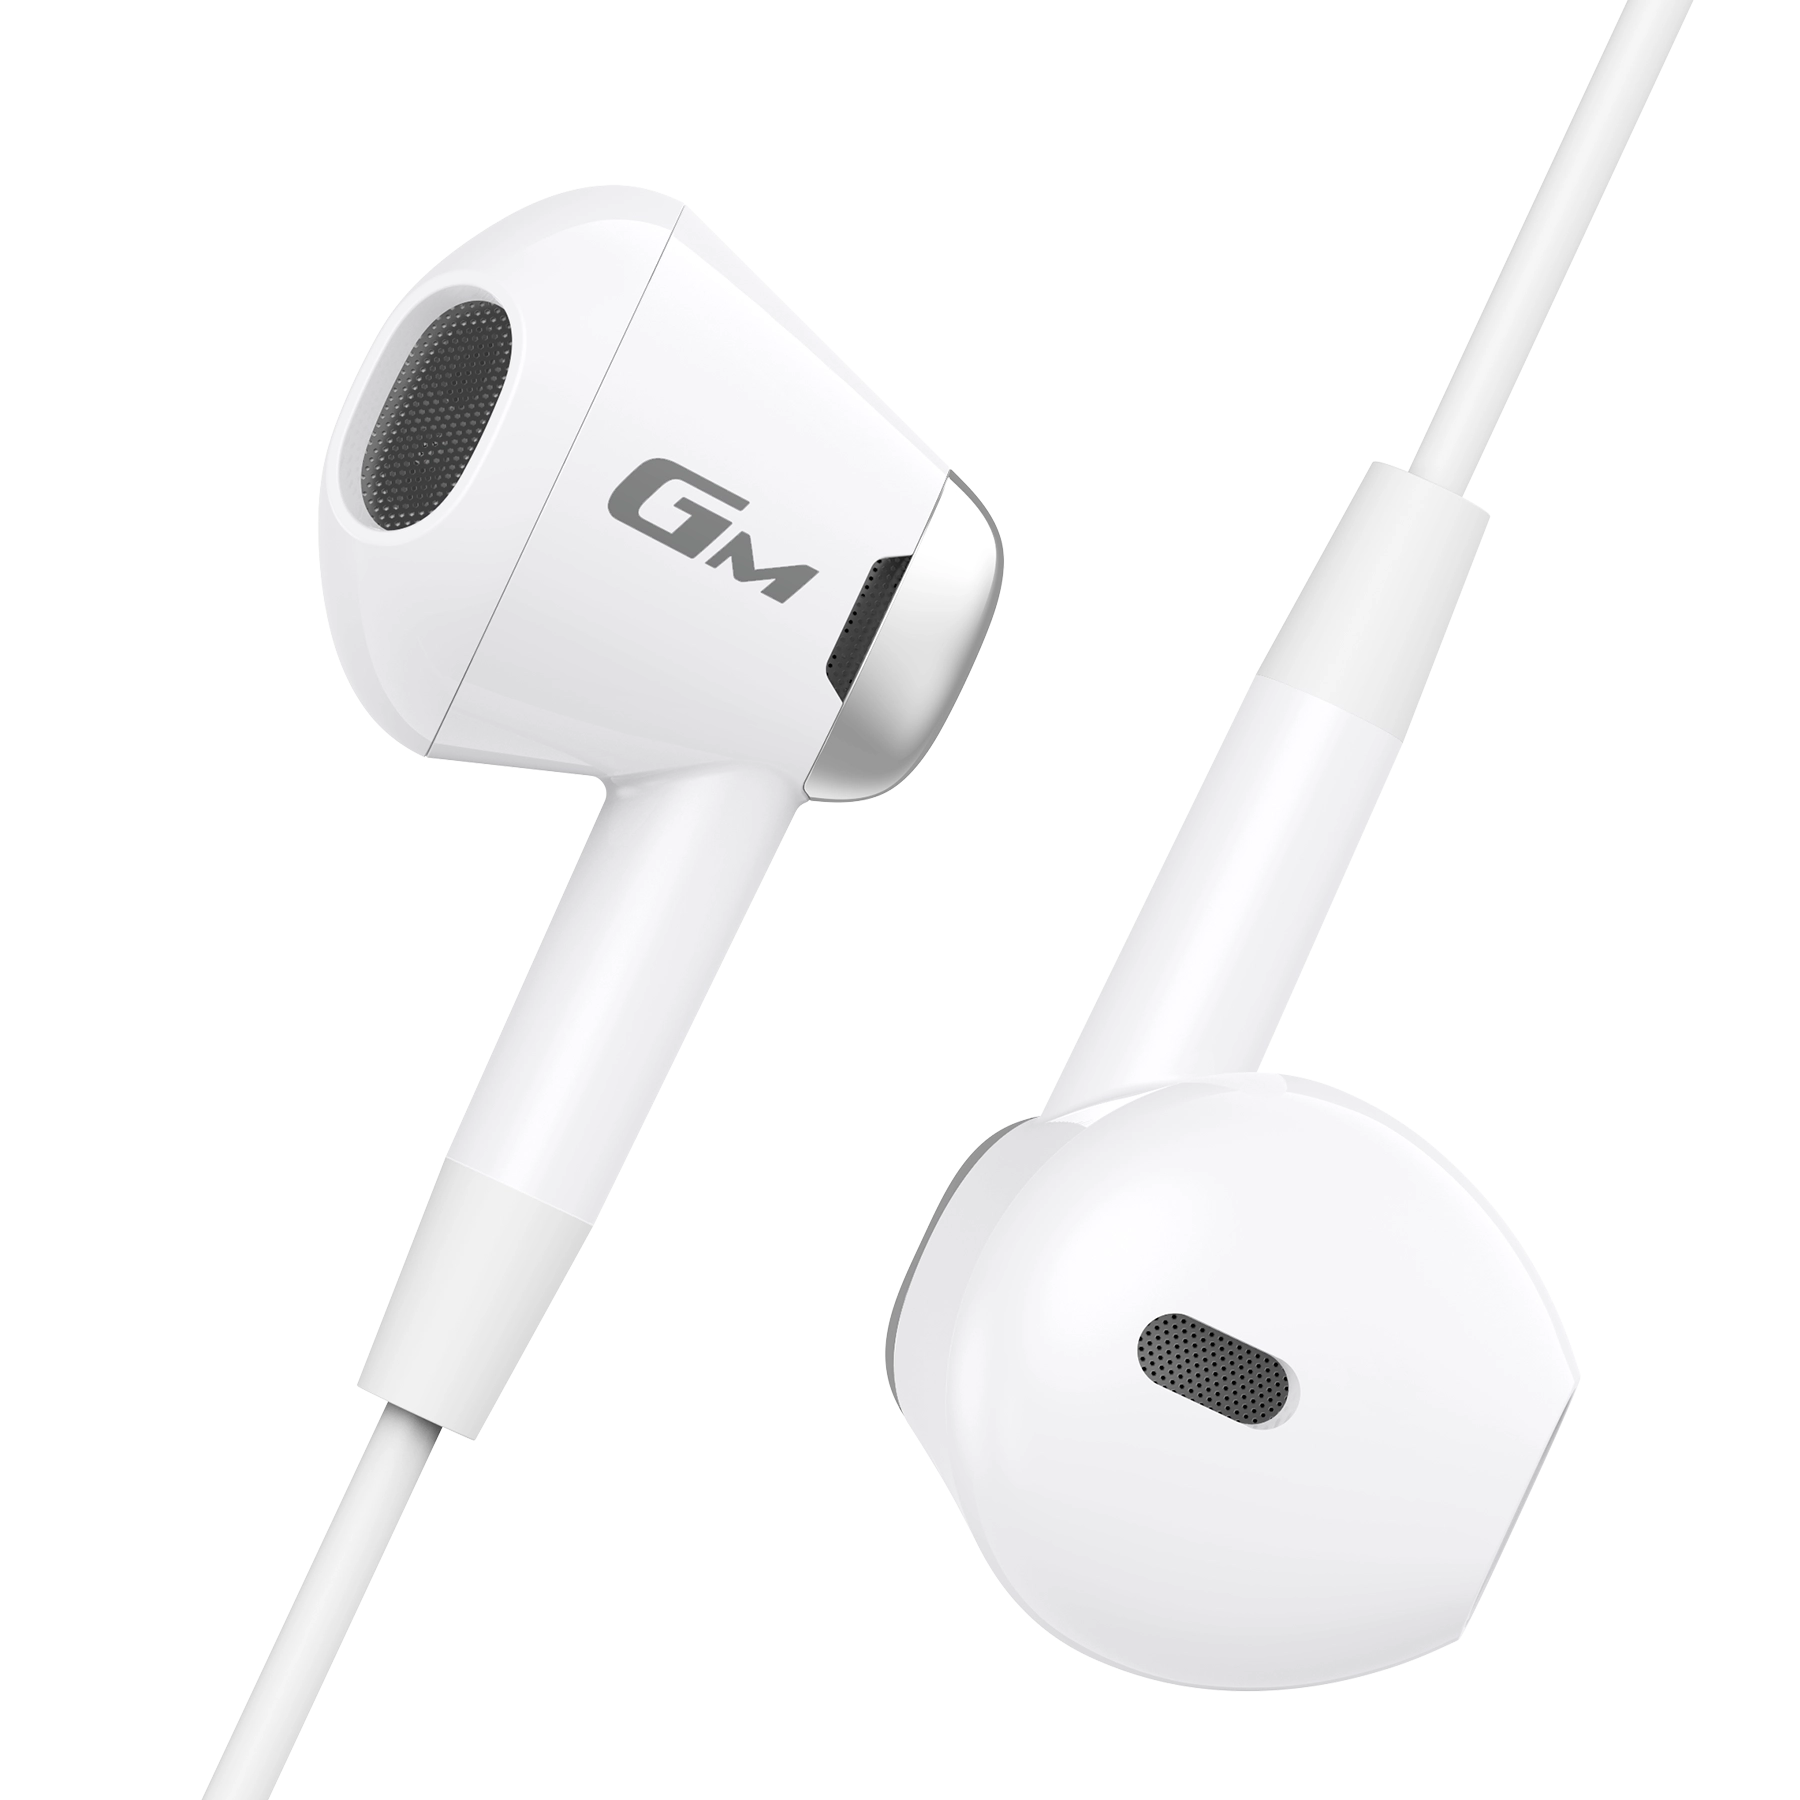 GM180 PLUS Earbuds Product Pictures white_2